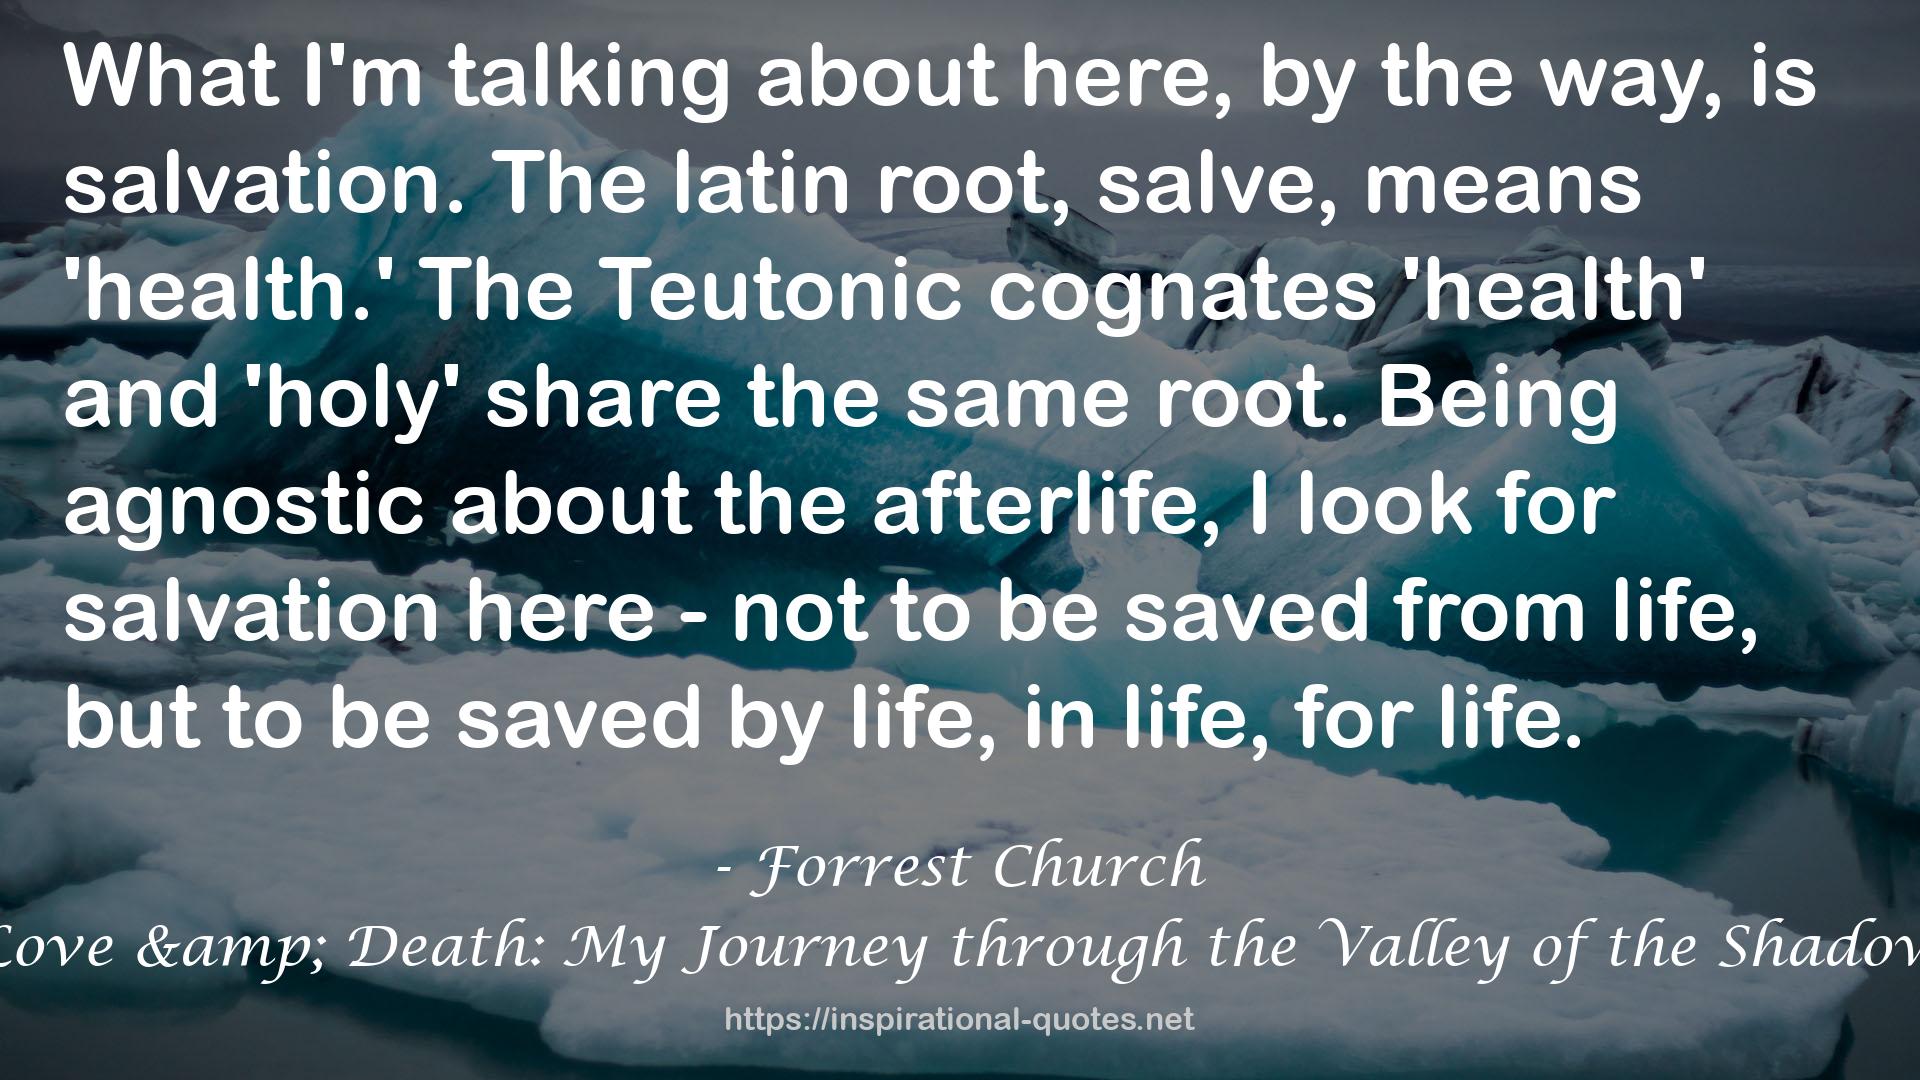 Love & Death: My Journey through the Valley of the Shadow QUOTES